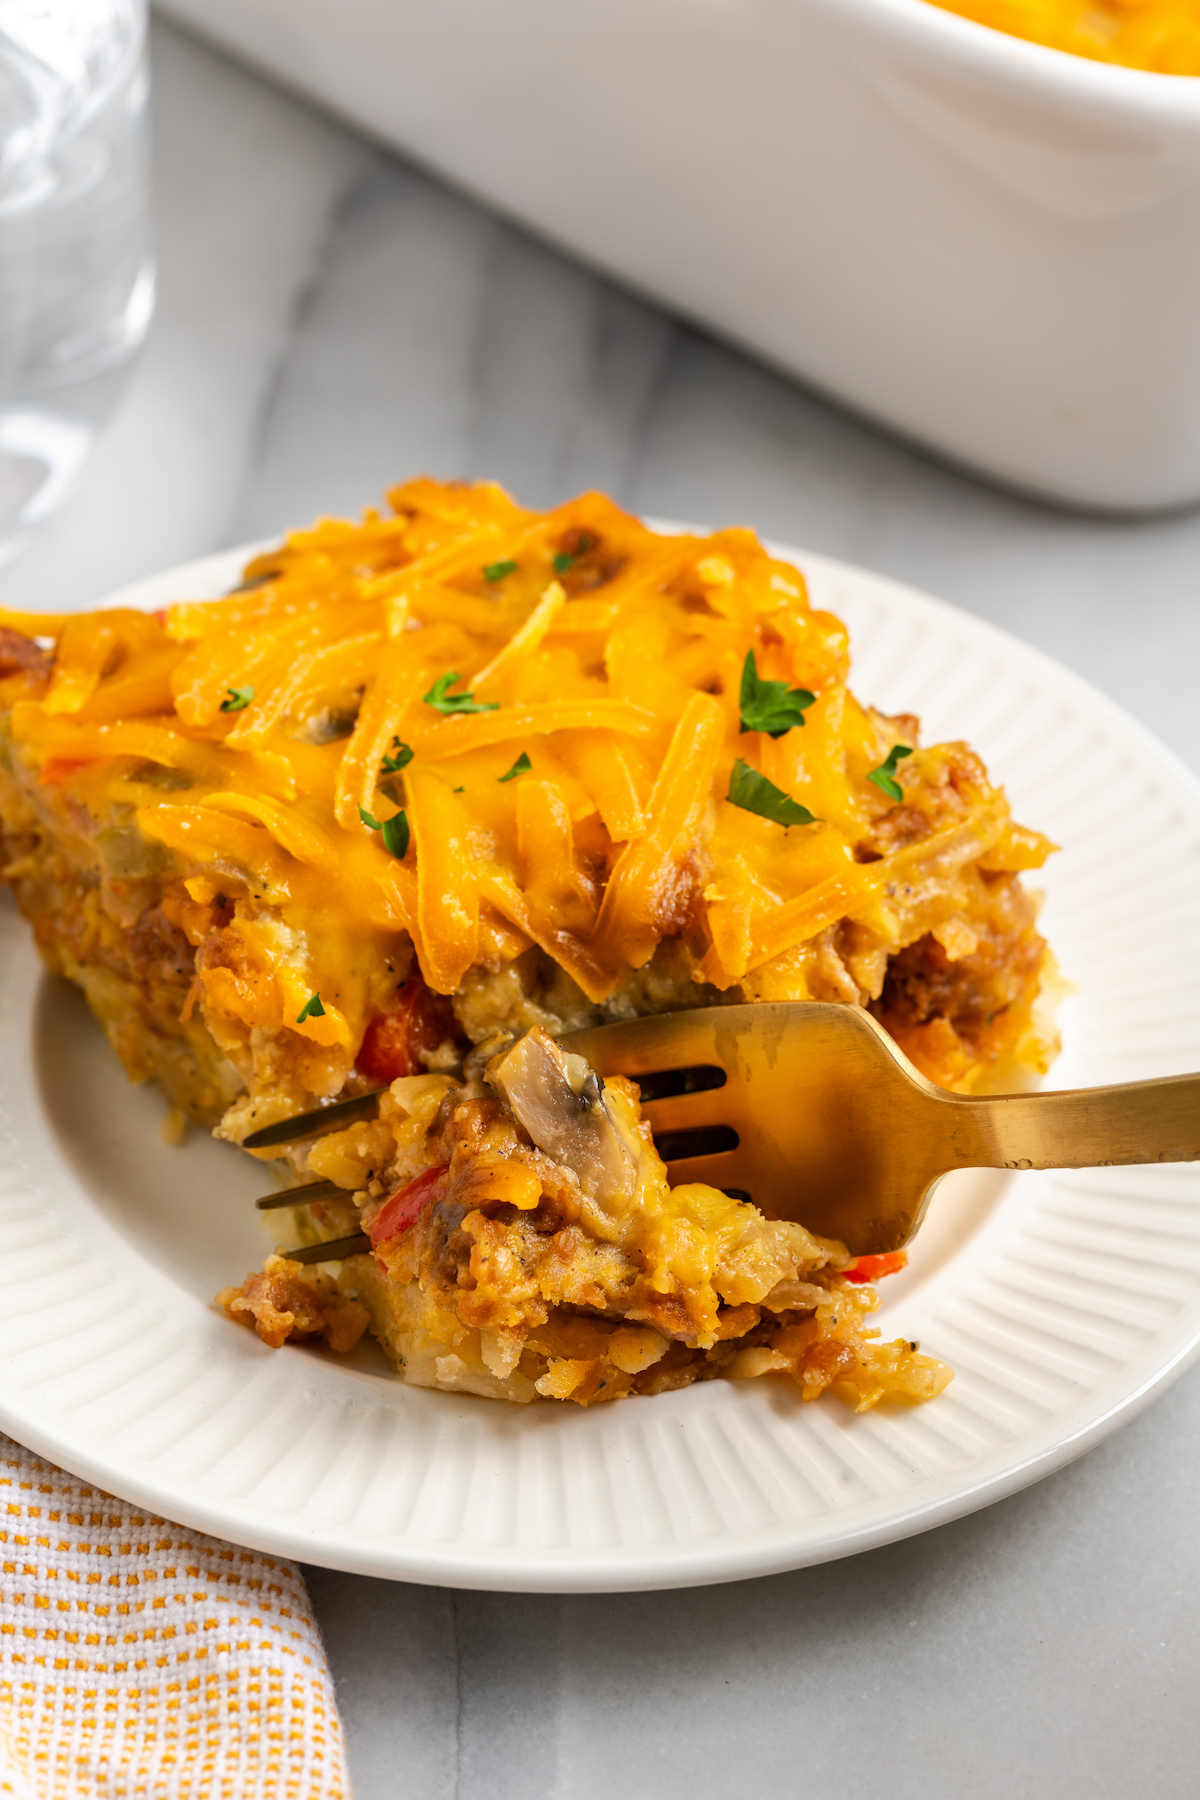 Vegan hashbrown breakfast casserole on plate with fork